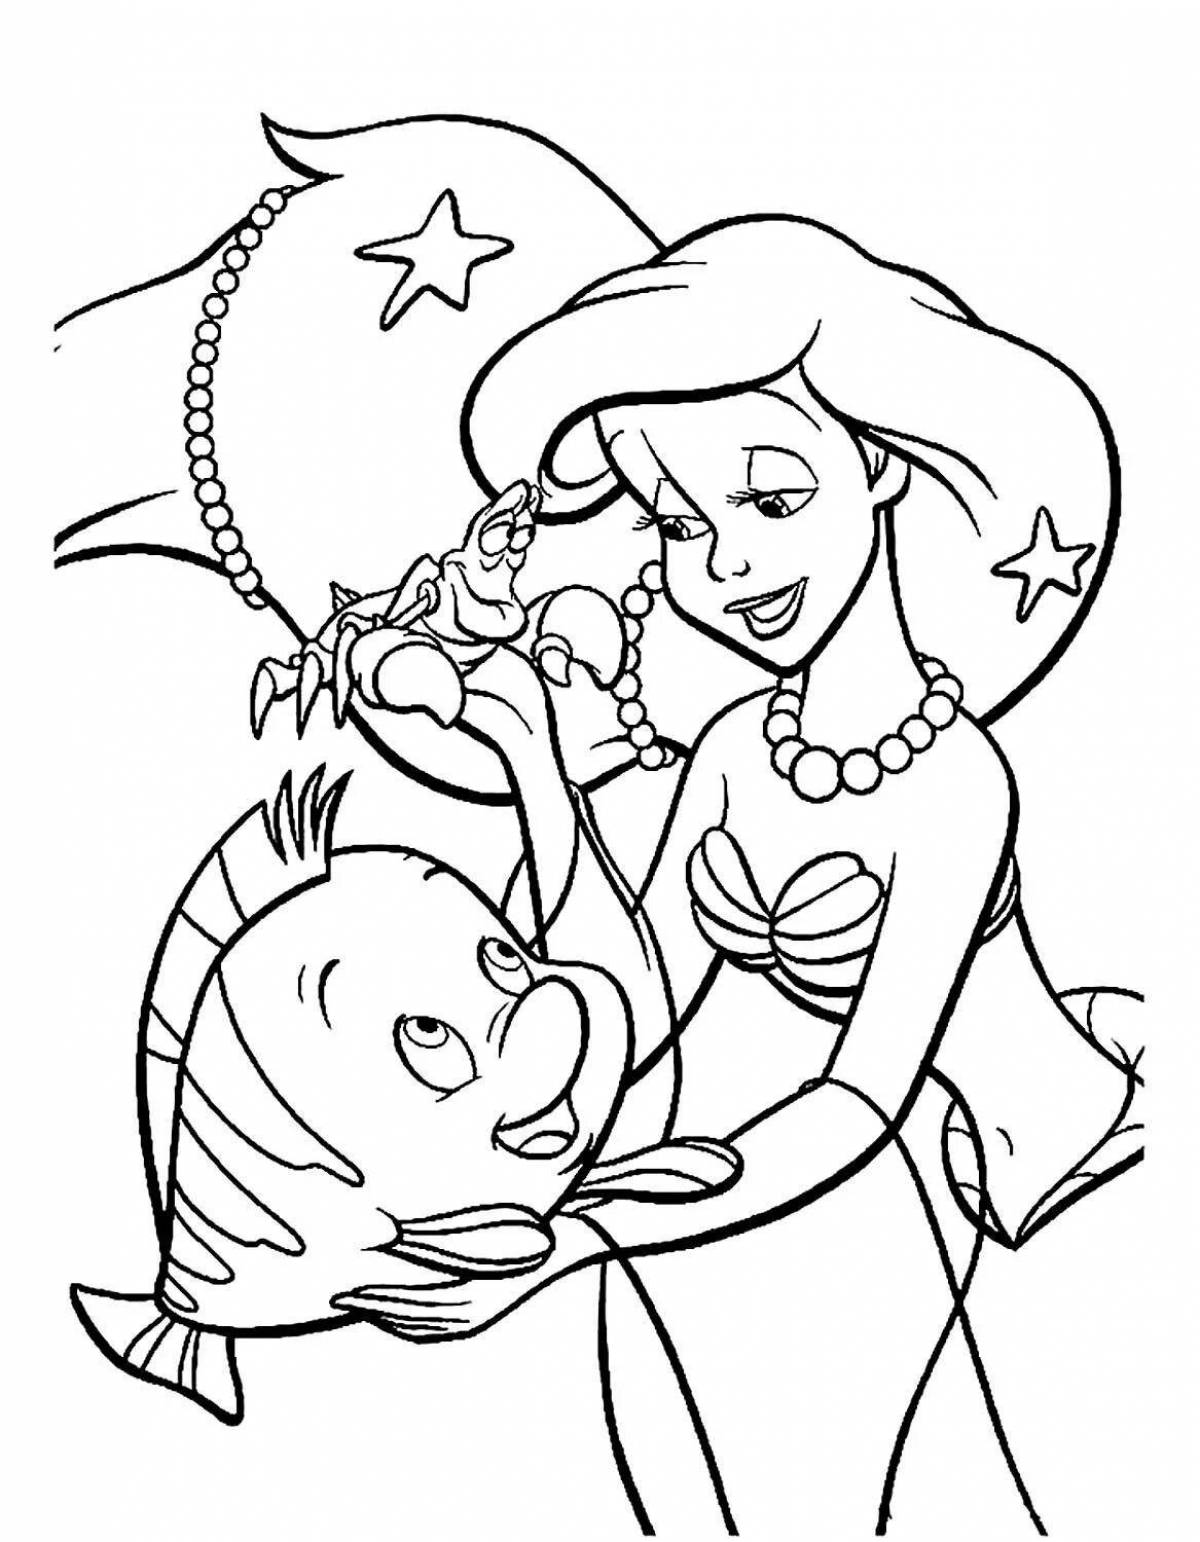 Amazing ariel little mermaid coloring book for kids